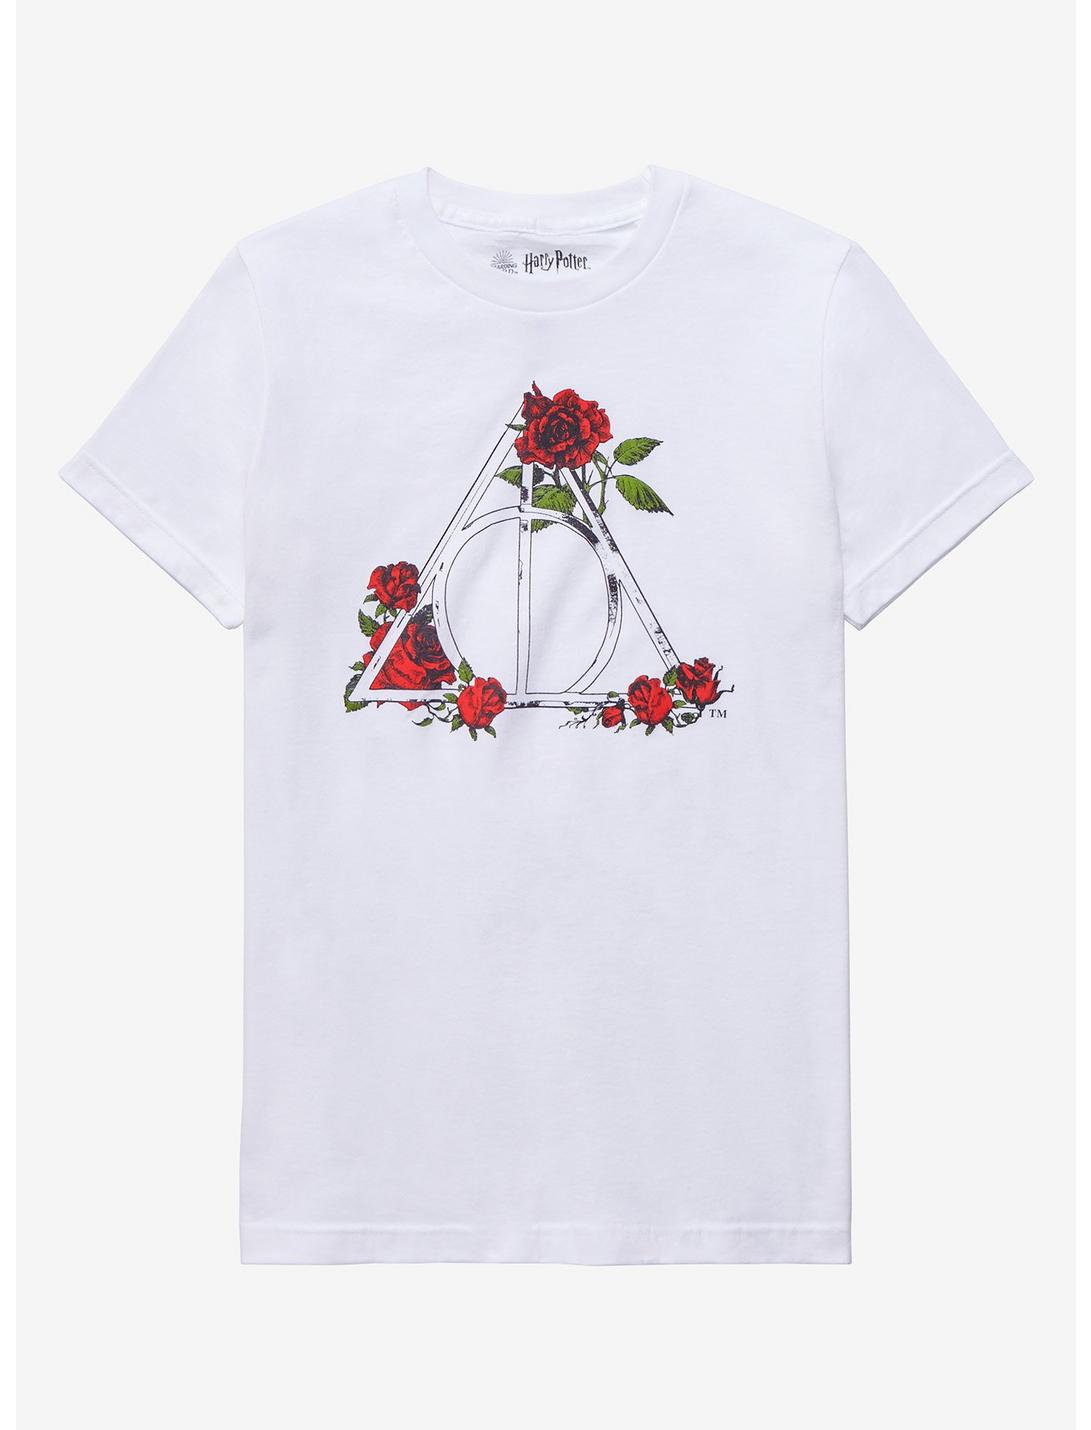 Harry Potter Deathly Hallows Roses Girls T-Shirt, MULTI, hi-res